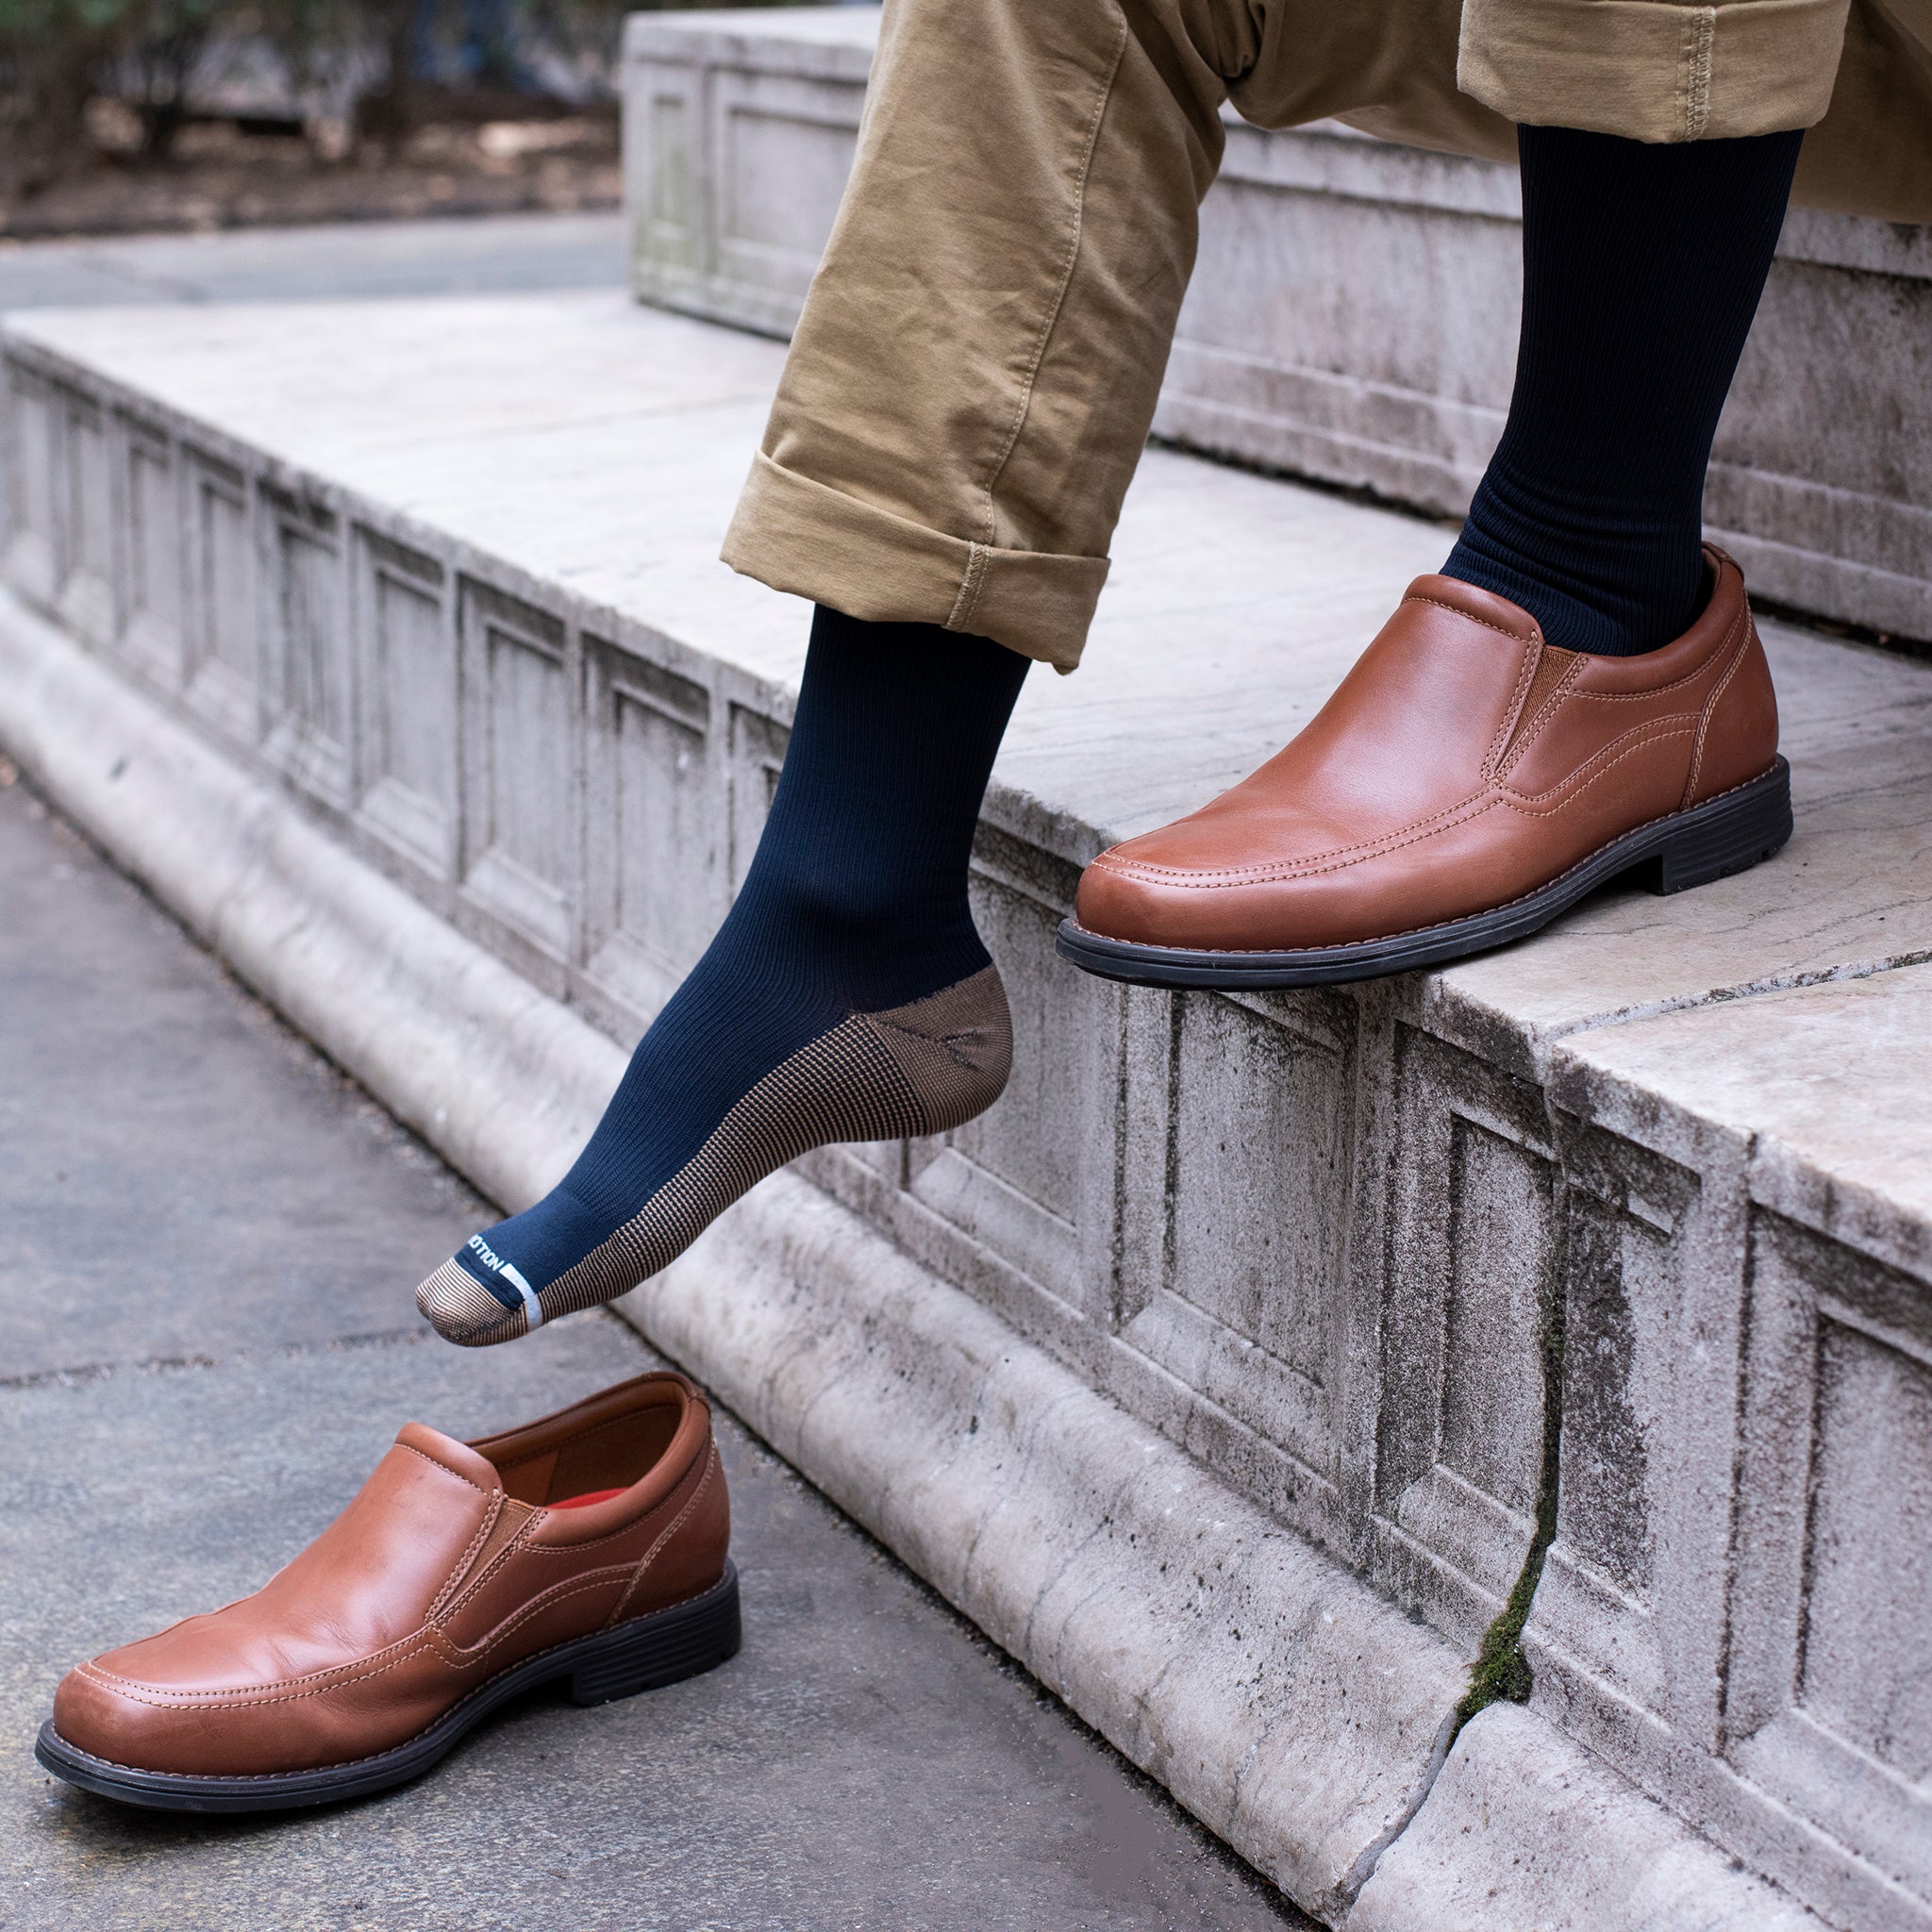 5 Careers That Need Compression Socks For Standing All Day